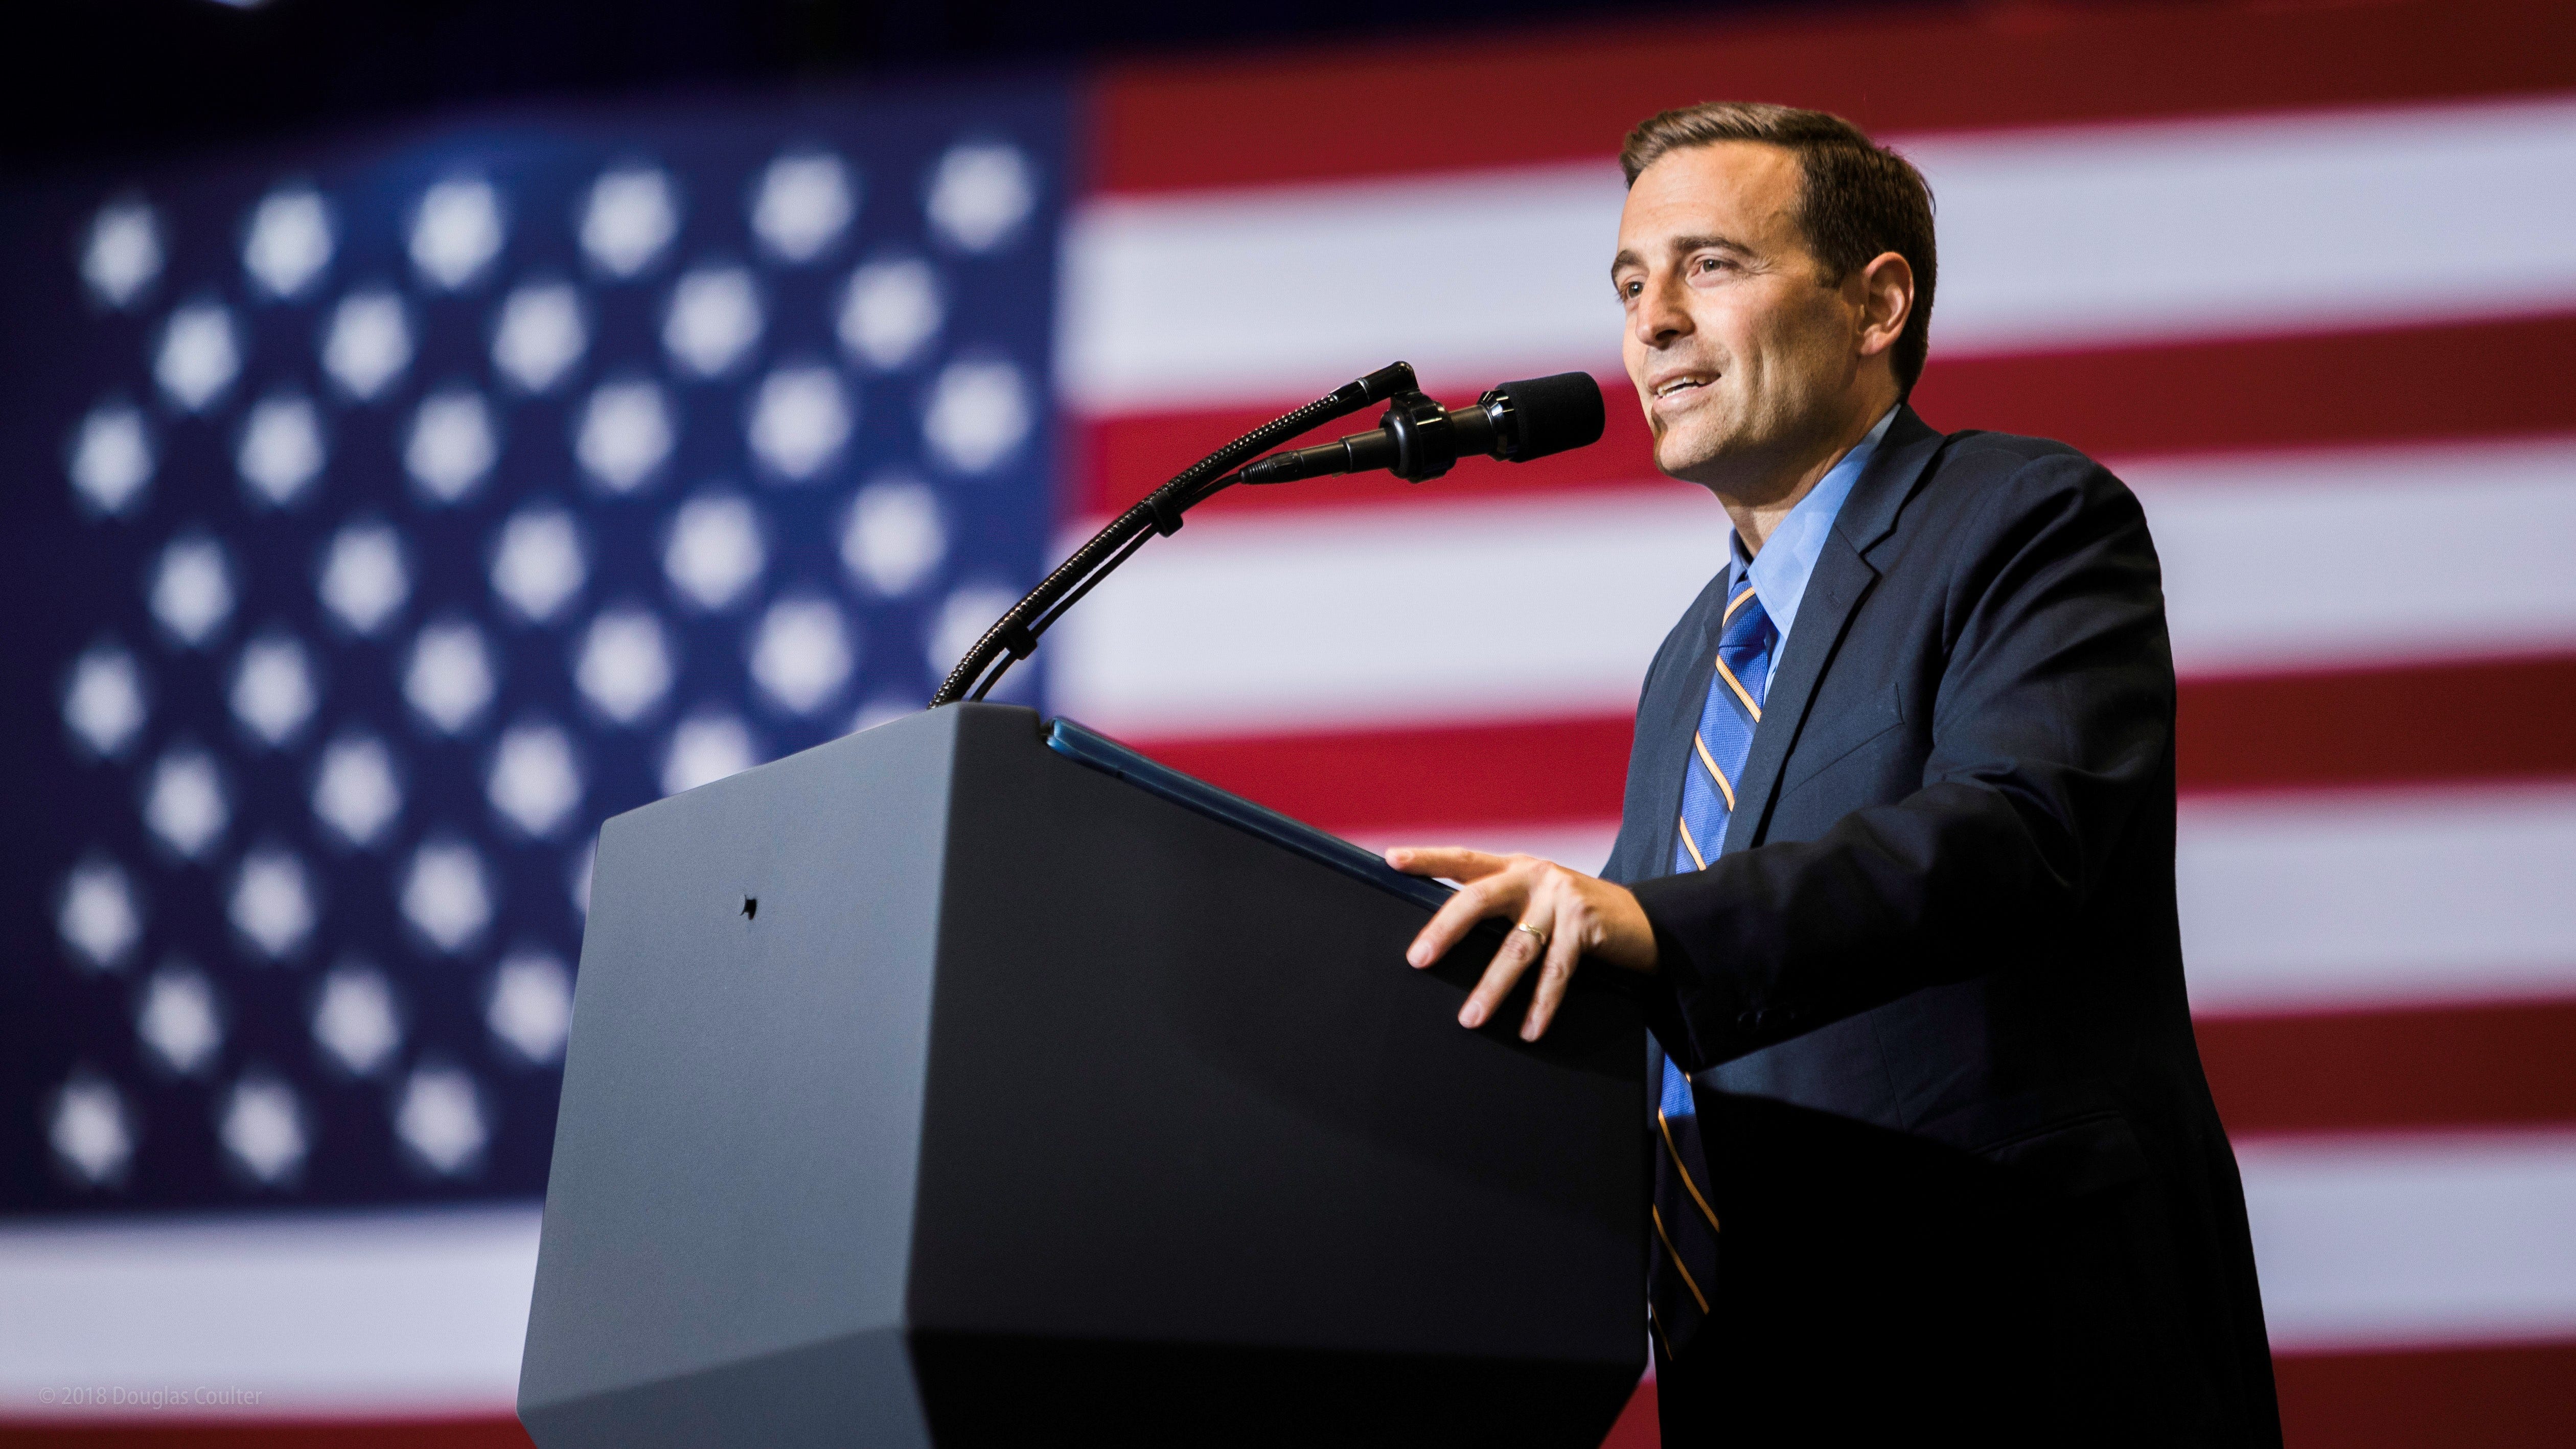 Laxalt leads in NV Senate race against Dem Senator in new poll: ‘Nevadans are fed up with Cortez Masto’